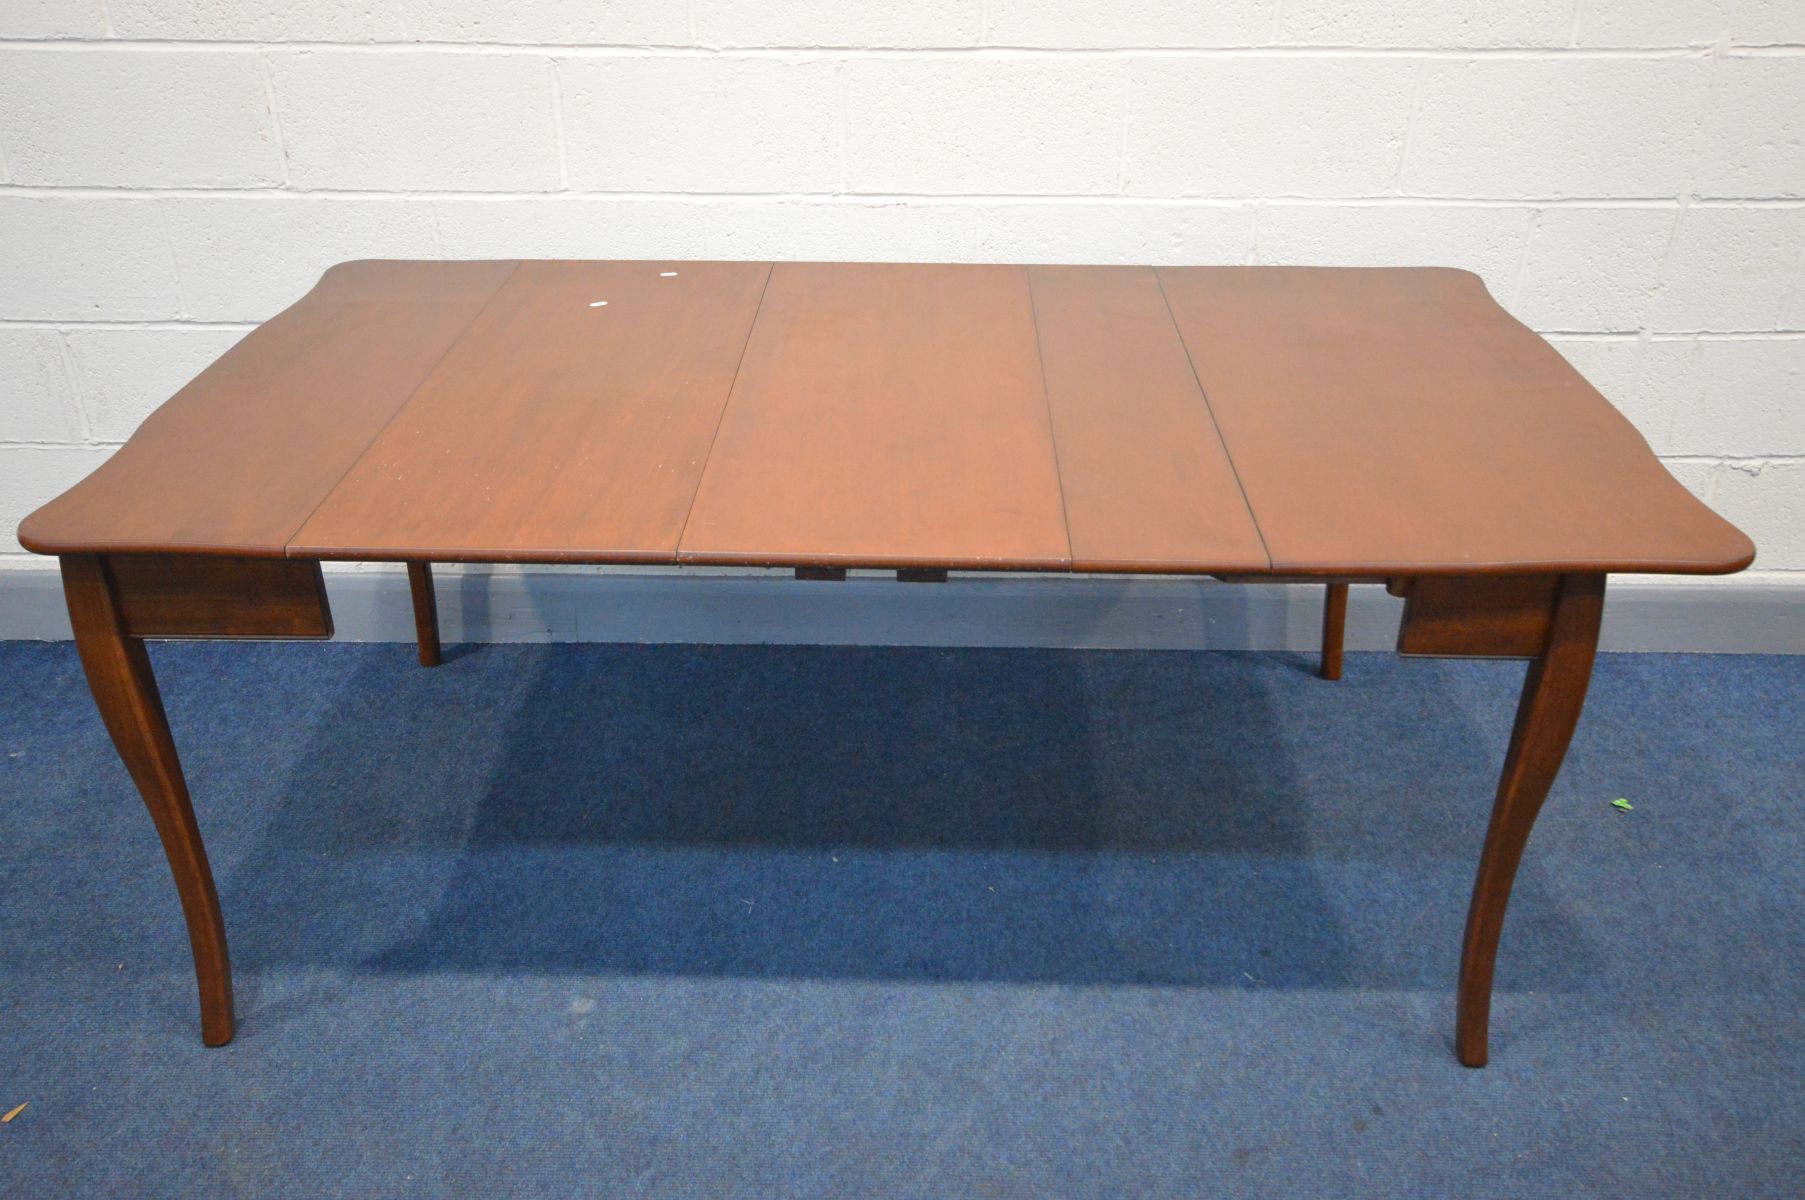 AN CHERRYWOOD EXTENDING DINING TABLE, that folds out from a tea table, with two additional leaves,